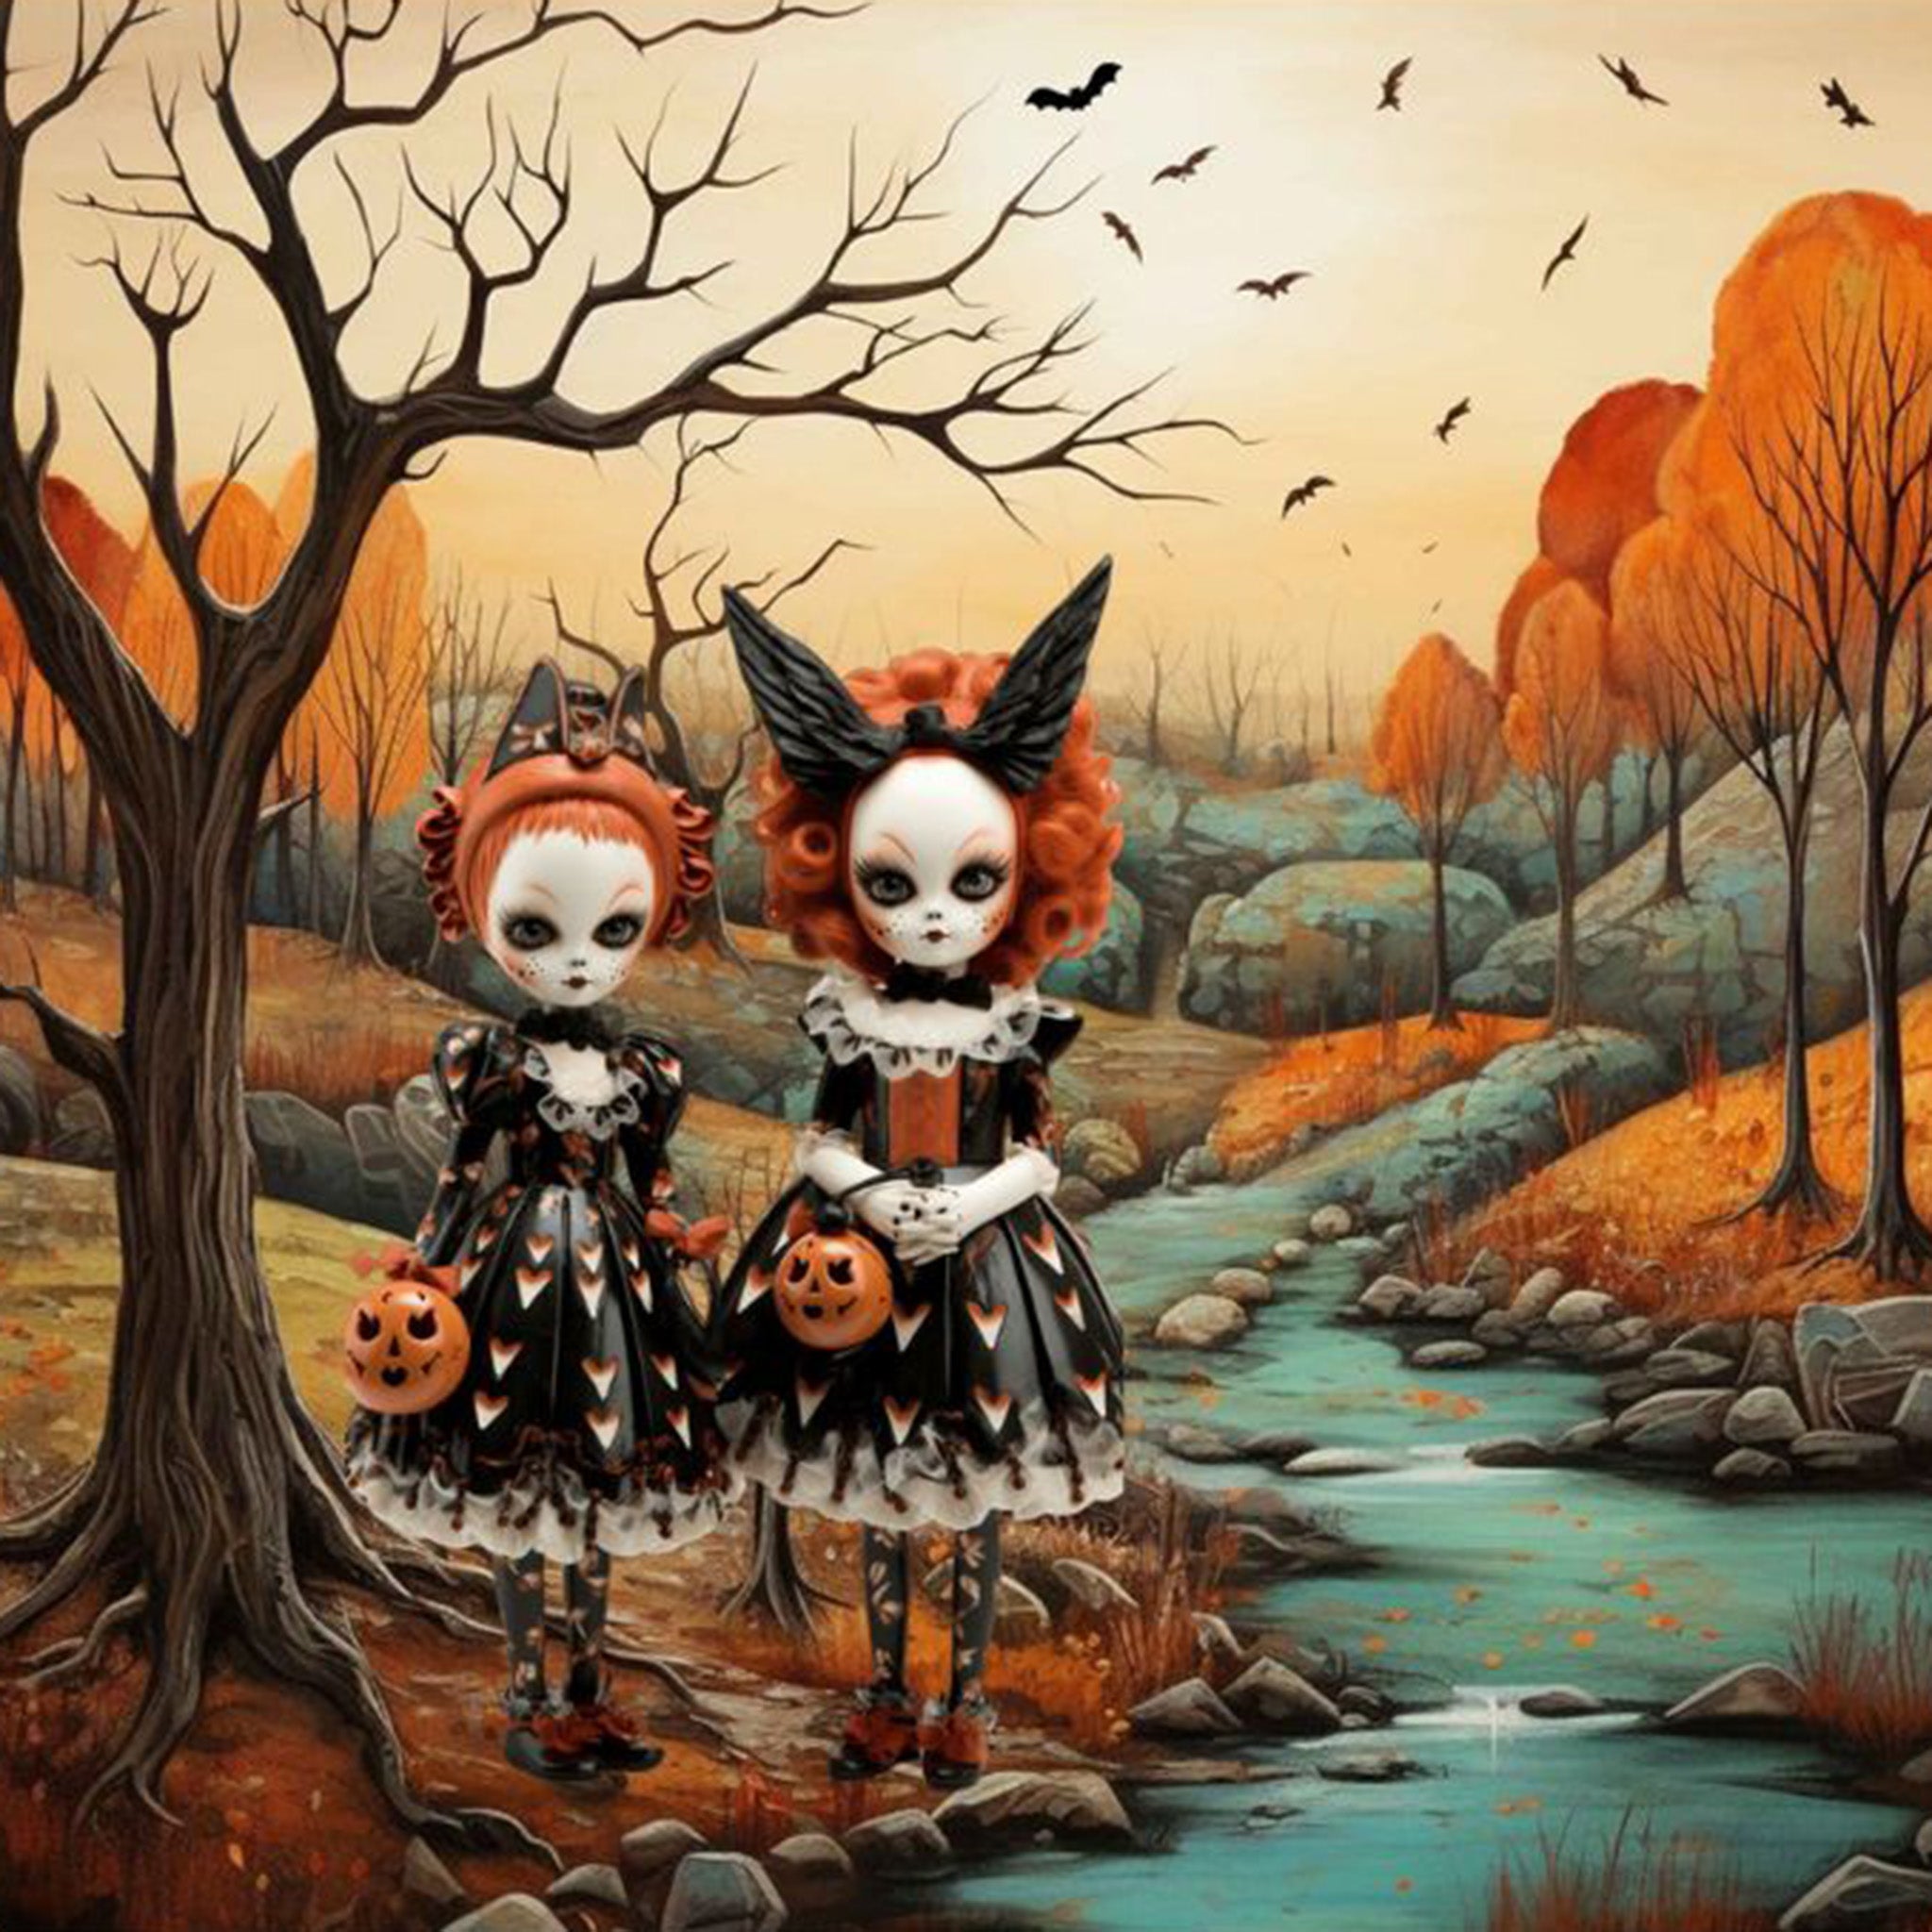 Close-up of a tissue paper design that features two spooky witches dolls by the river with trees and fall leaves in the background while bats swoop overhead. 